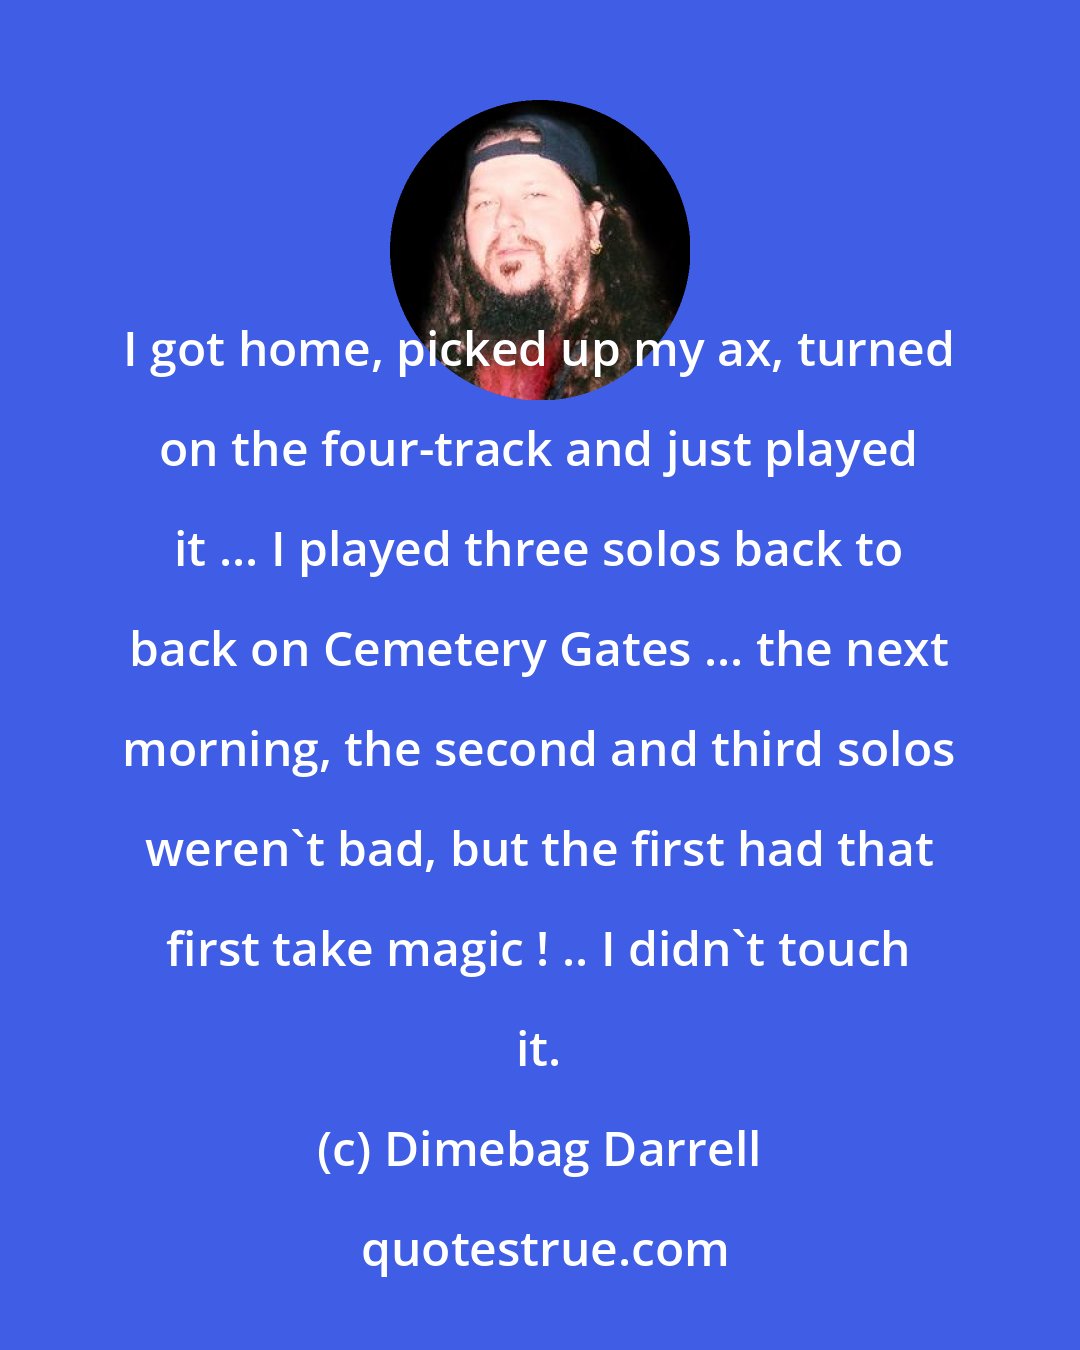 Dimebag Darrell: I got home, picked up my ax, turned on the four-track and just played it ... I played three solos back to back on Cemetery Gates ... the next morning, the second and third solos weren't bad, but the first had that first take magic ! .. I didn't touch it.